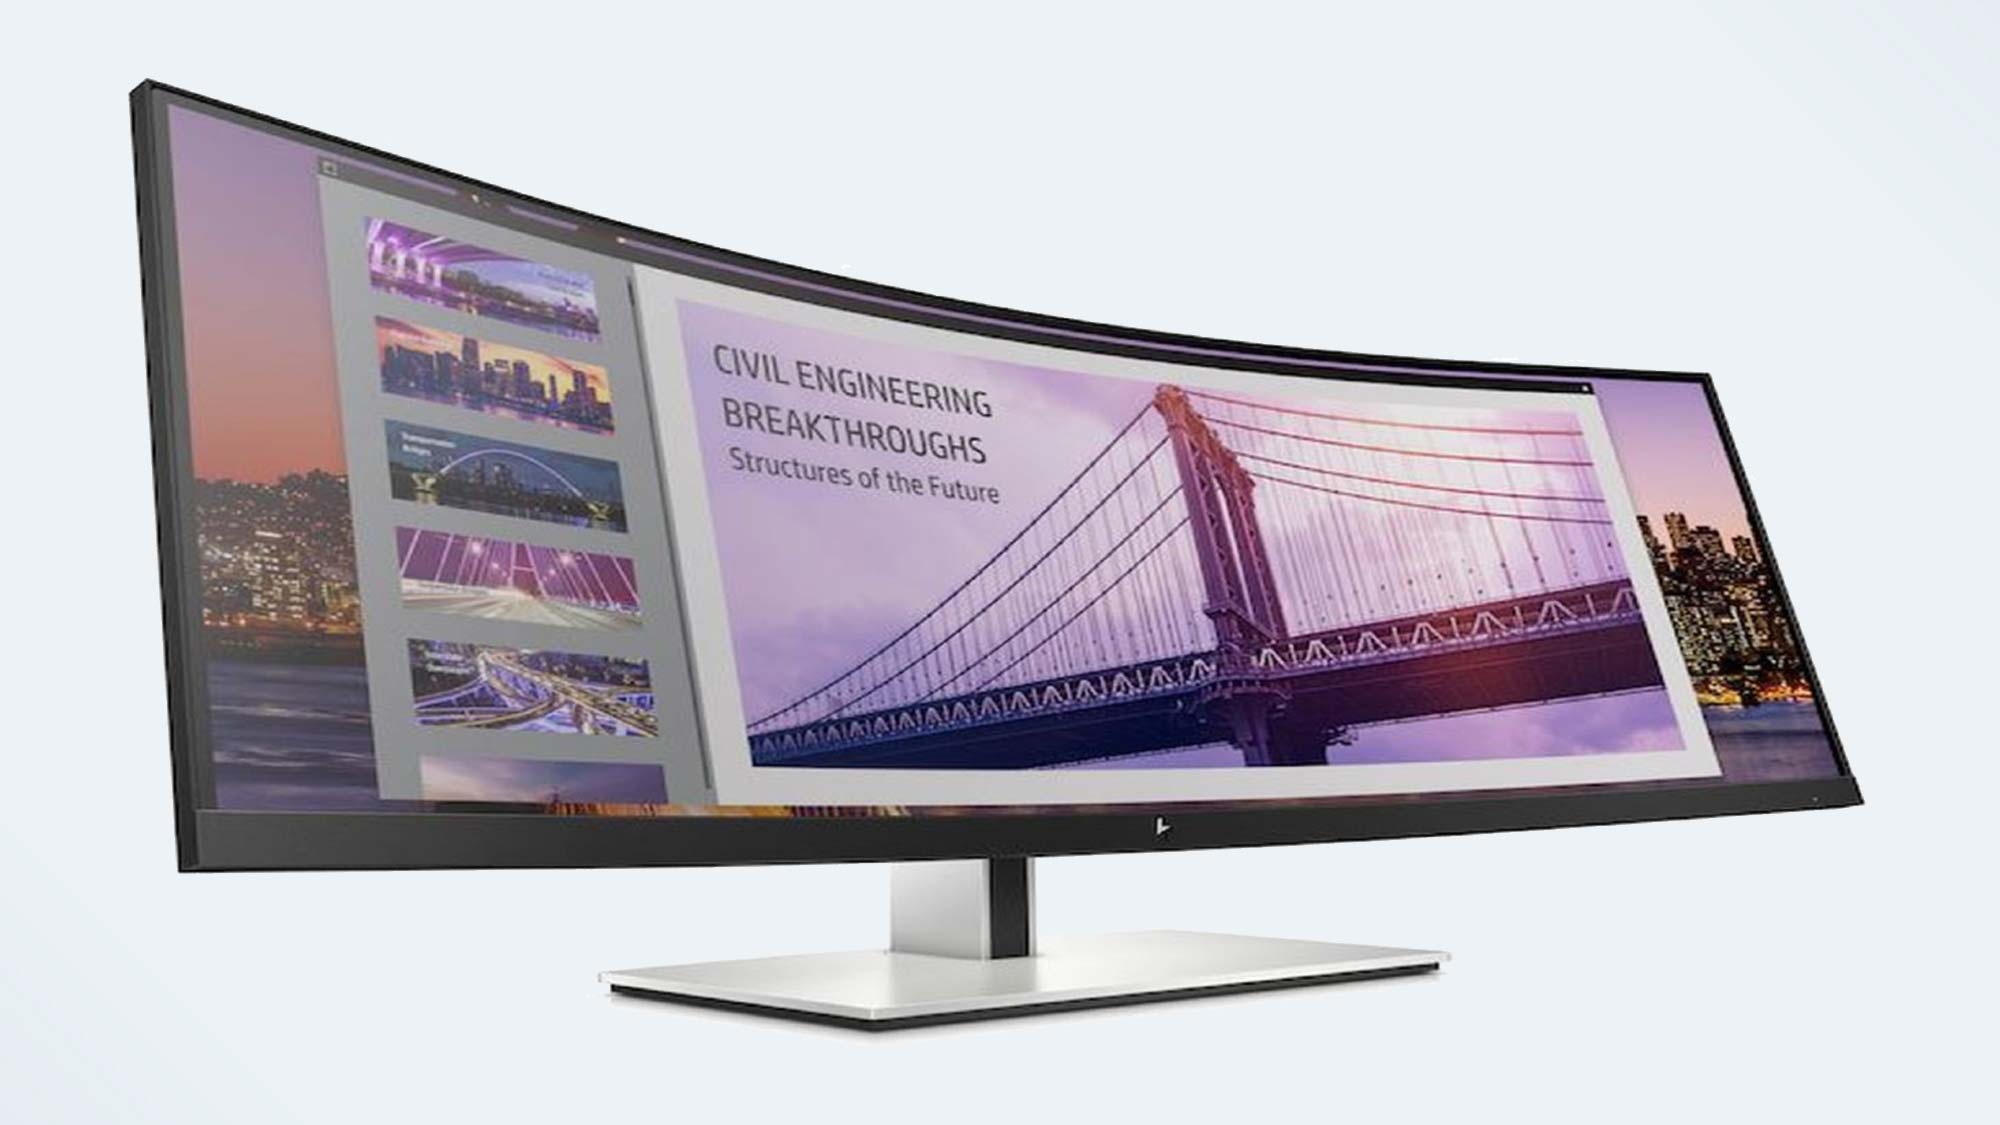 Best Curved Monitors 2022